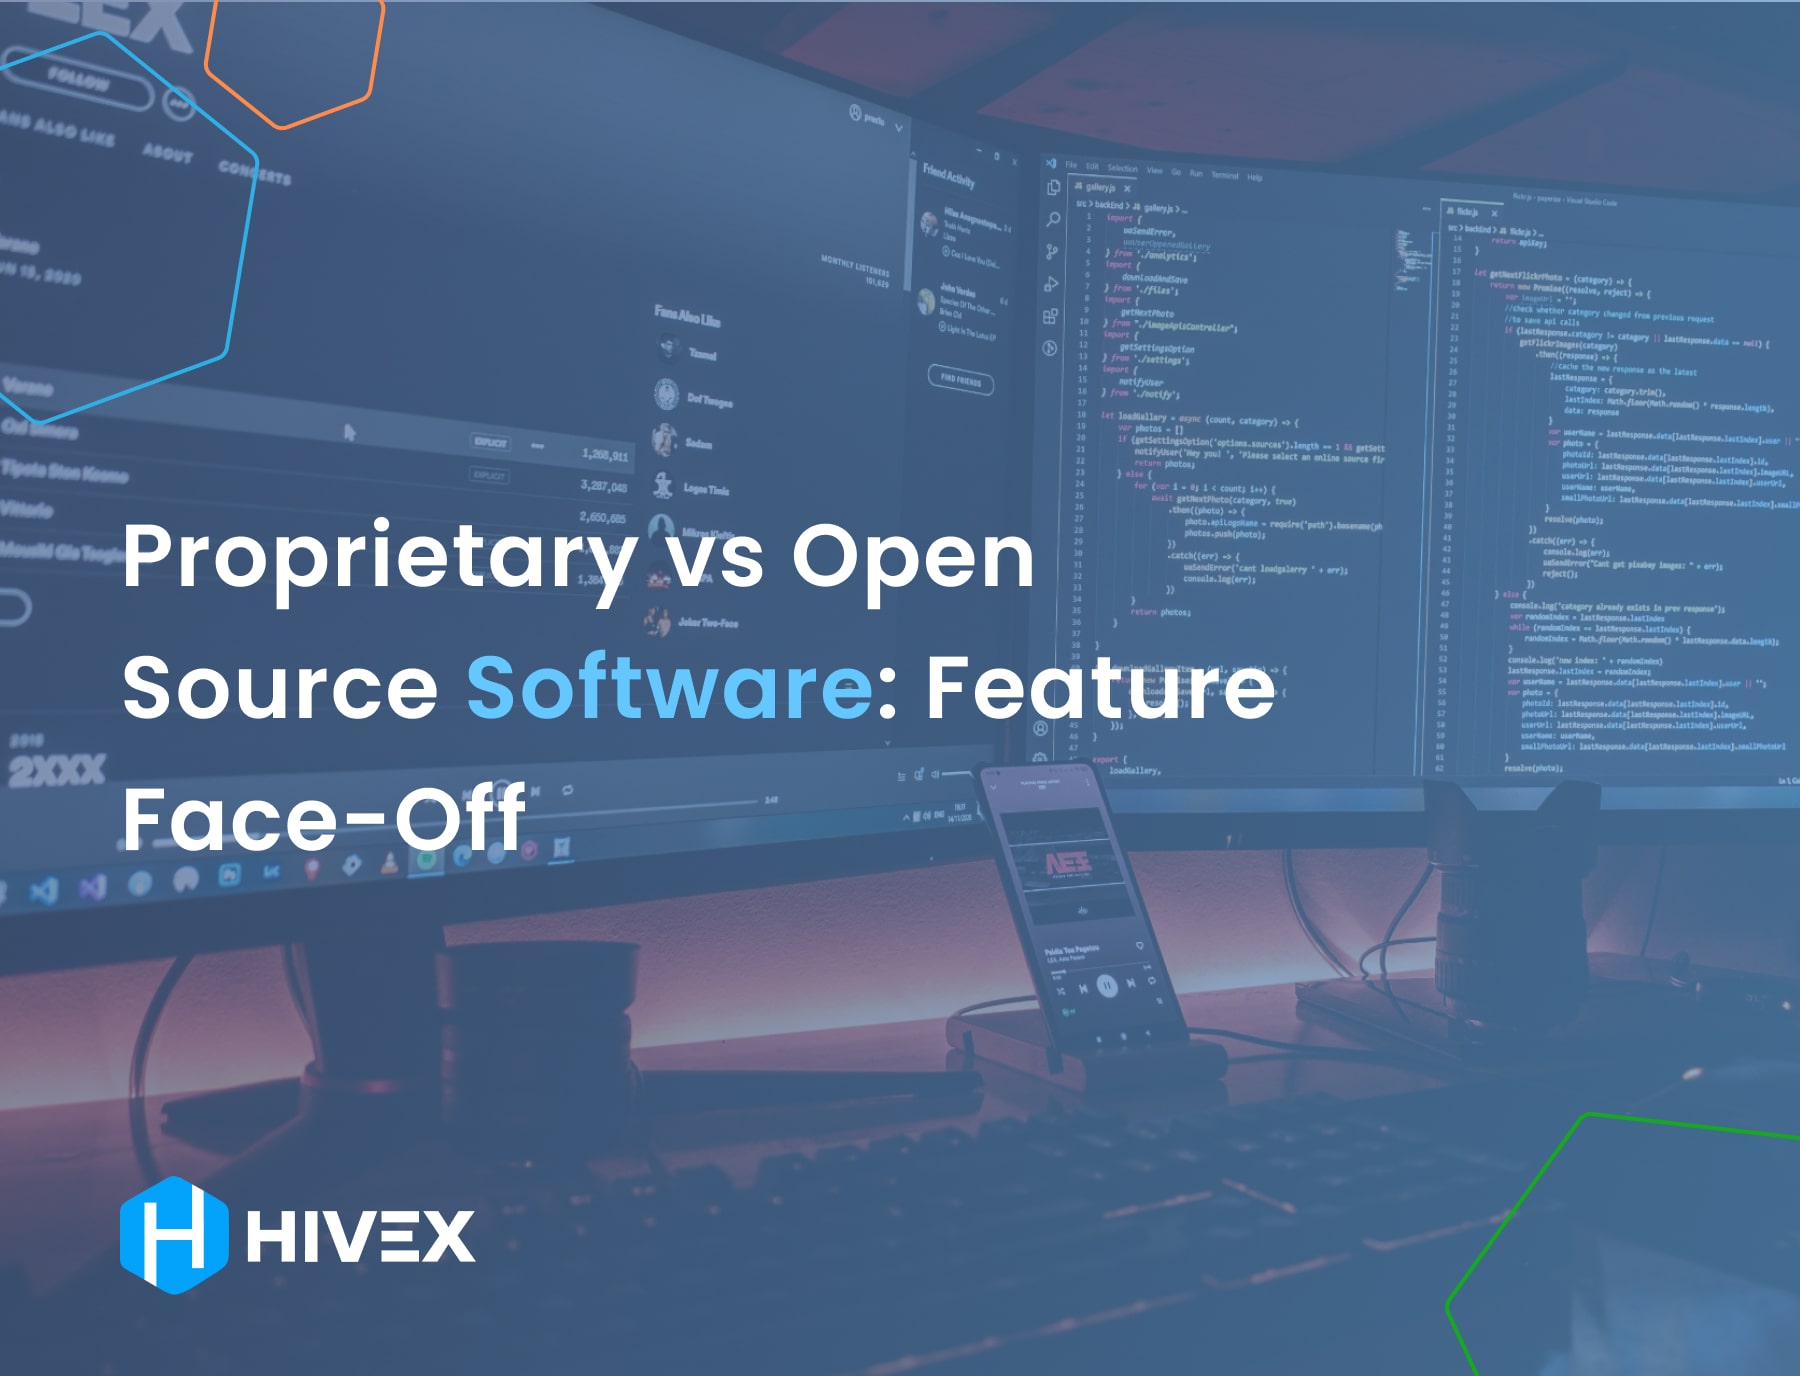 Proprietary vs Open Source Software: Feature Face-Off